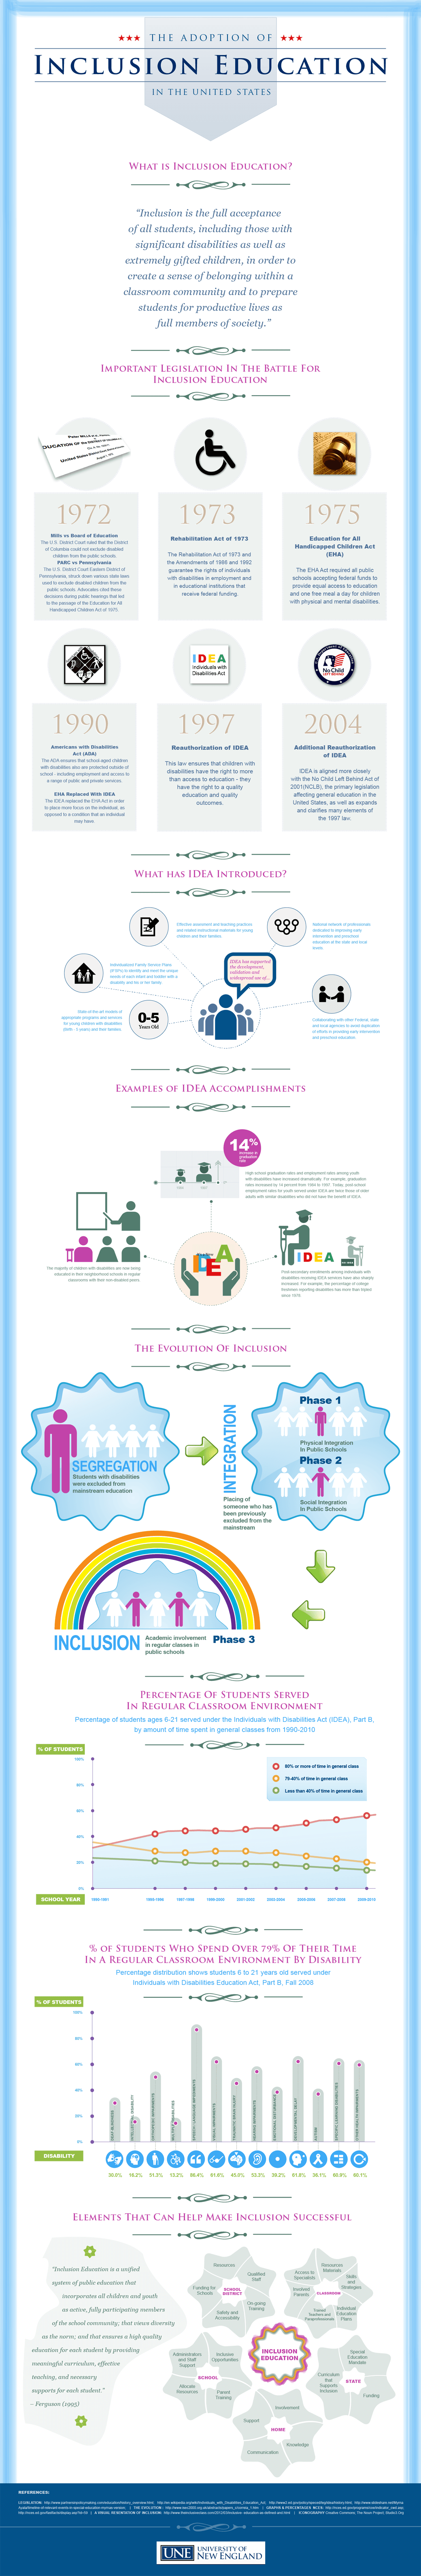 The Adoption of Inclusion Education Infographic